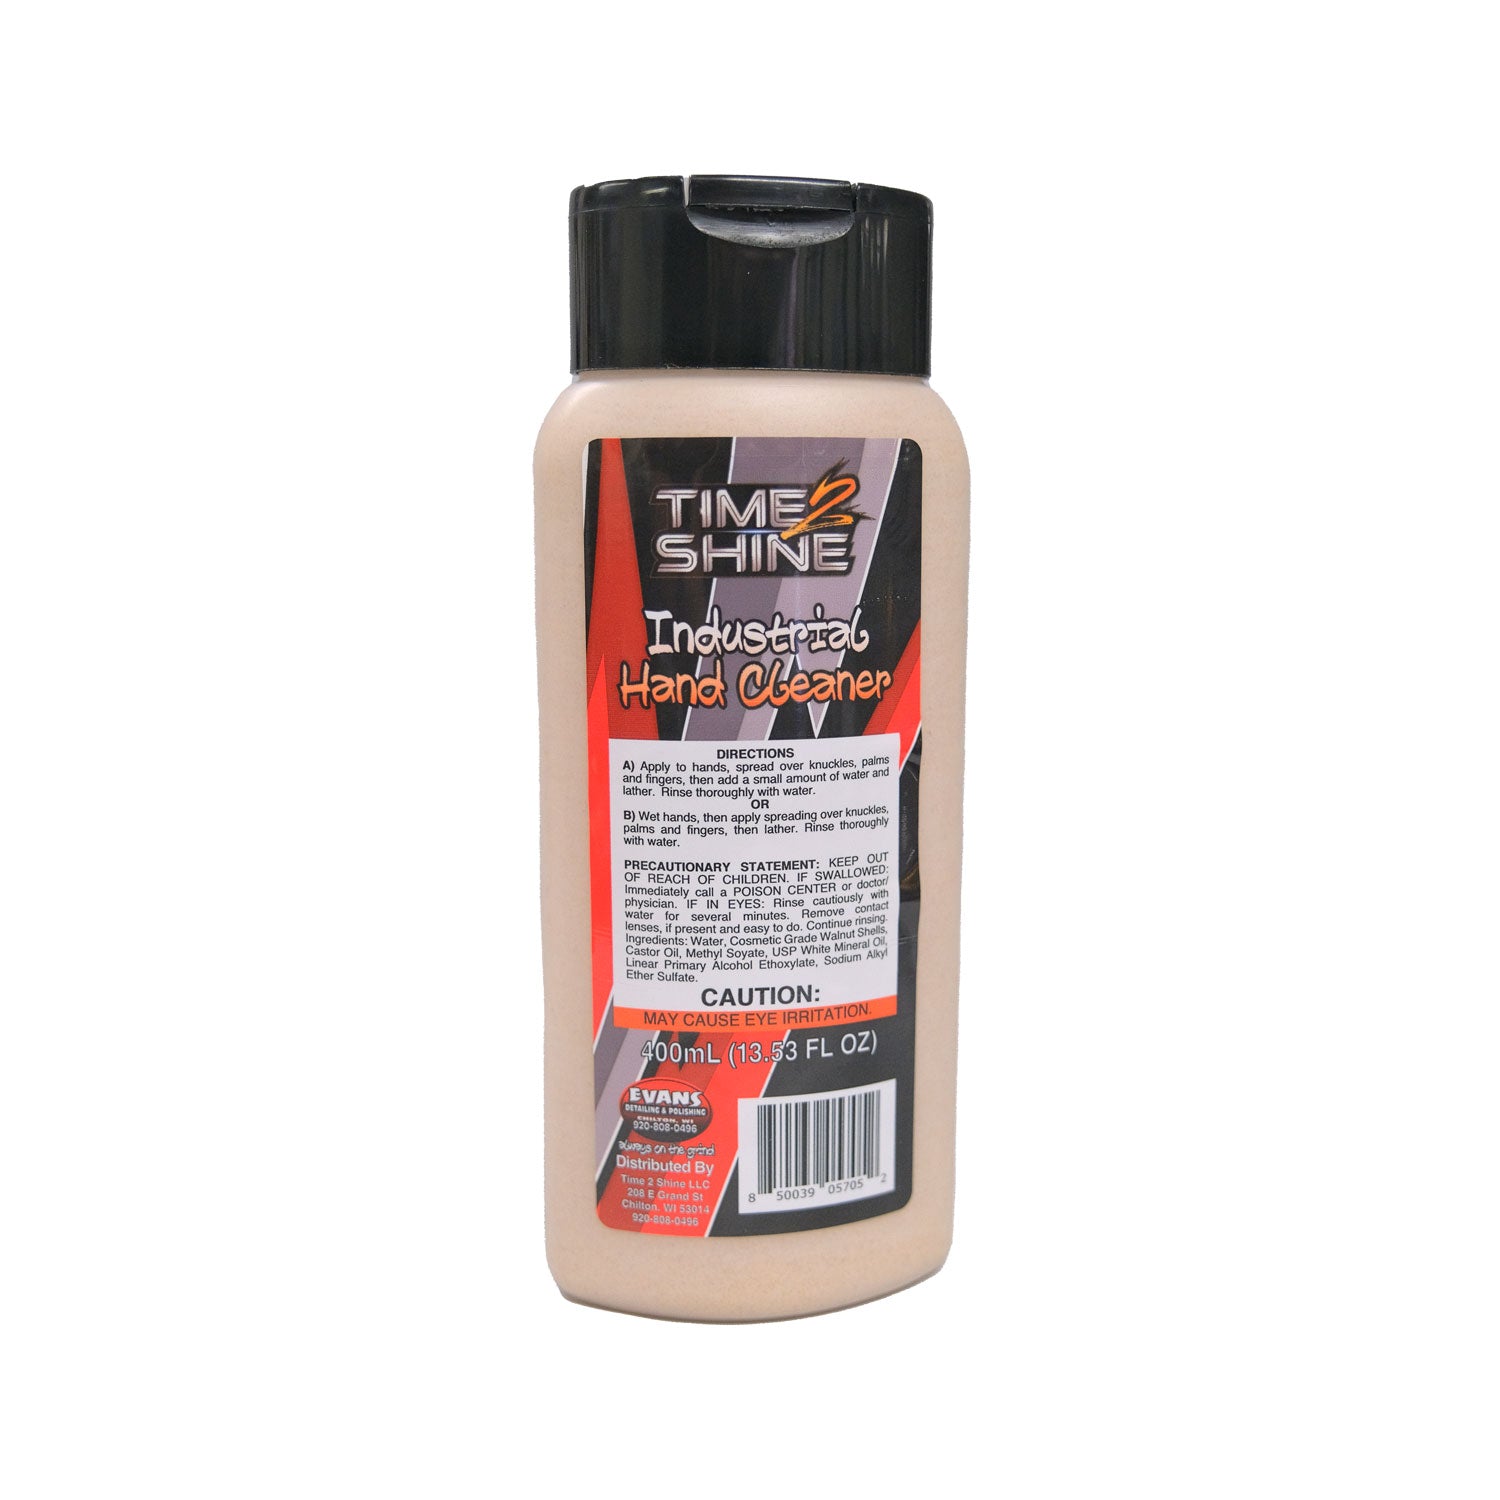 Time 2 Shine Industrial Hand Cleaner - Go Shine On